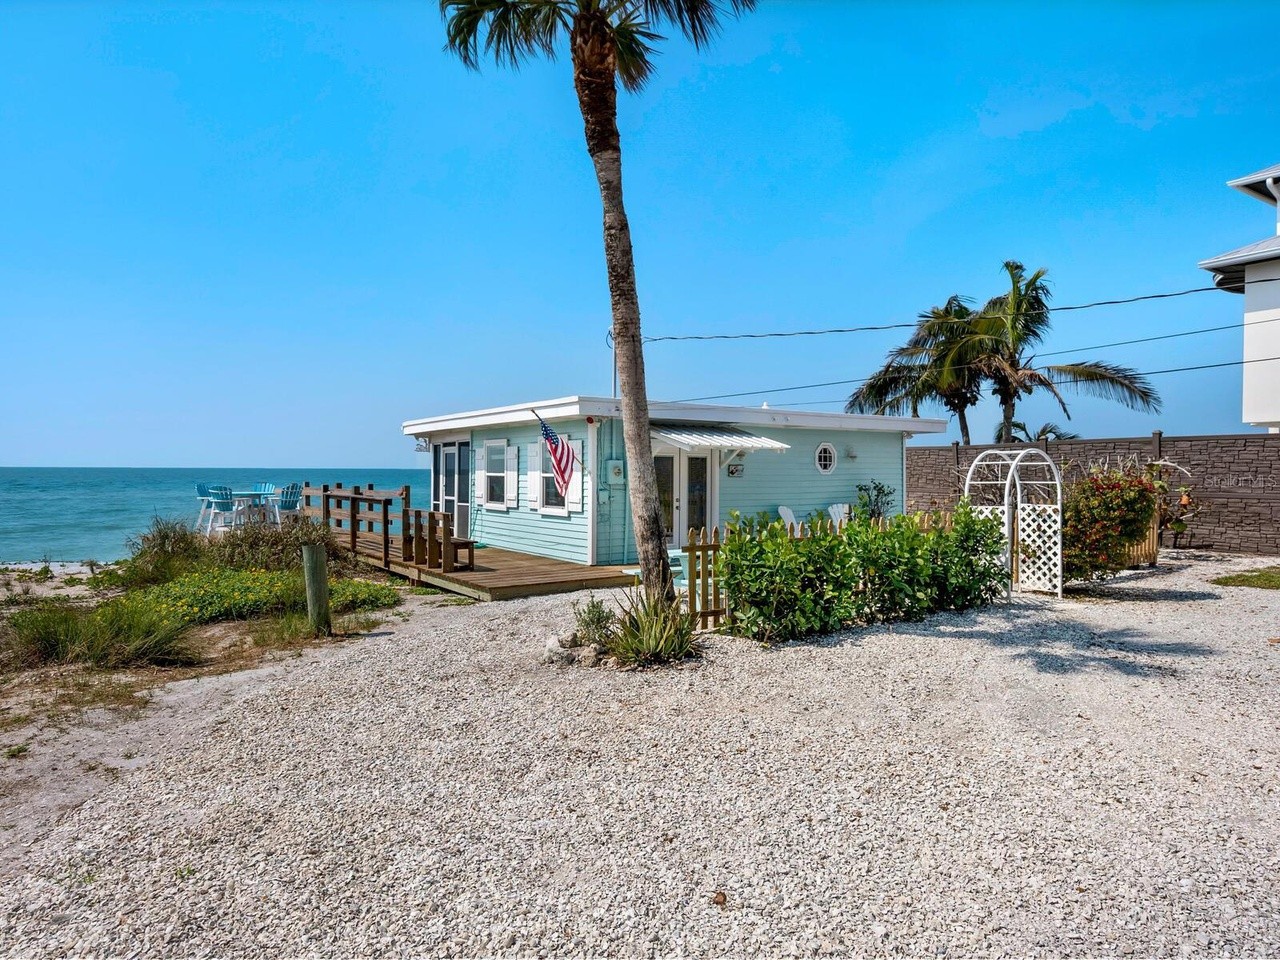 A nearly 500-square-foot beach house in Florida is on the market for $4.5 million